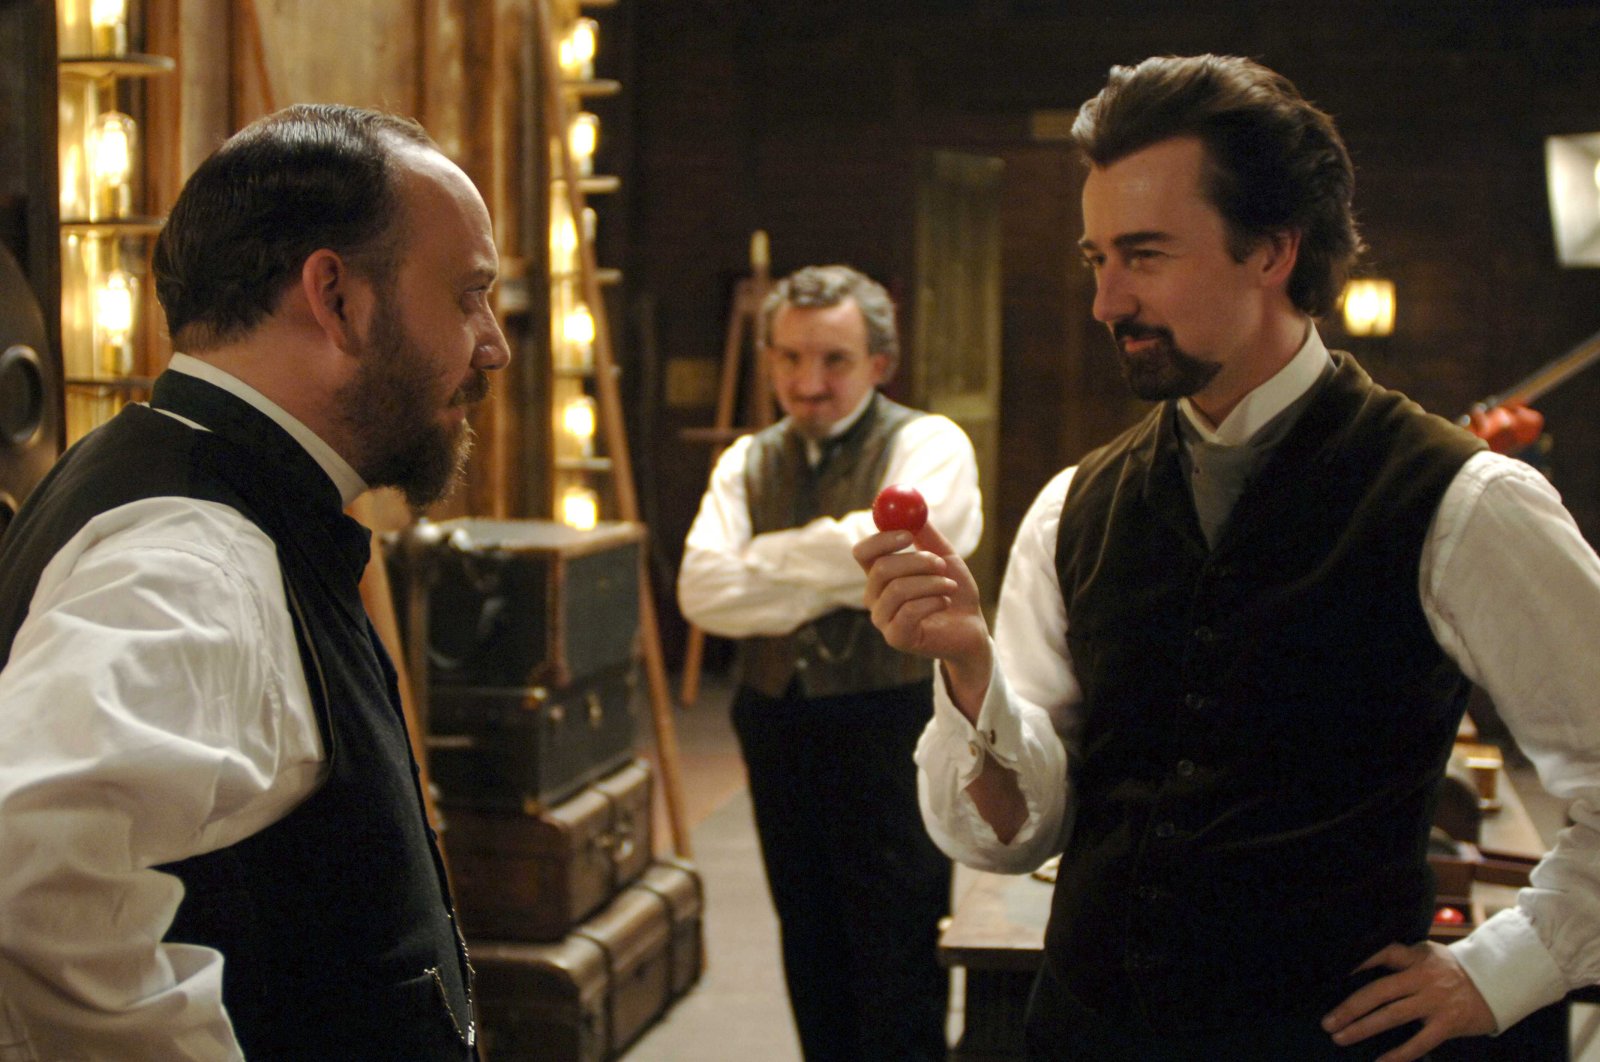 Edward Norton in a scene from "The Illusionist." (Sabah Archive Photo)